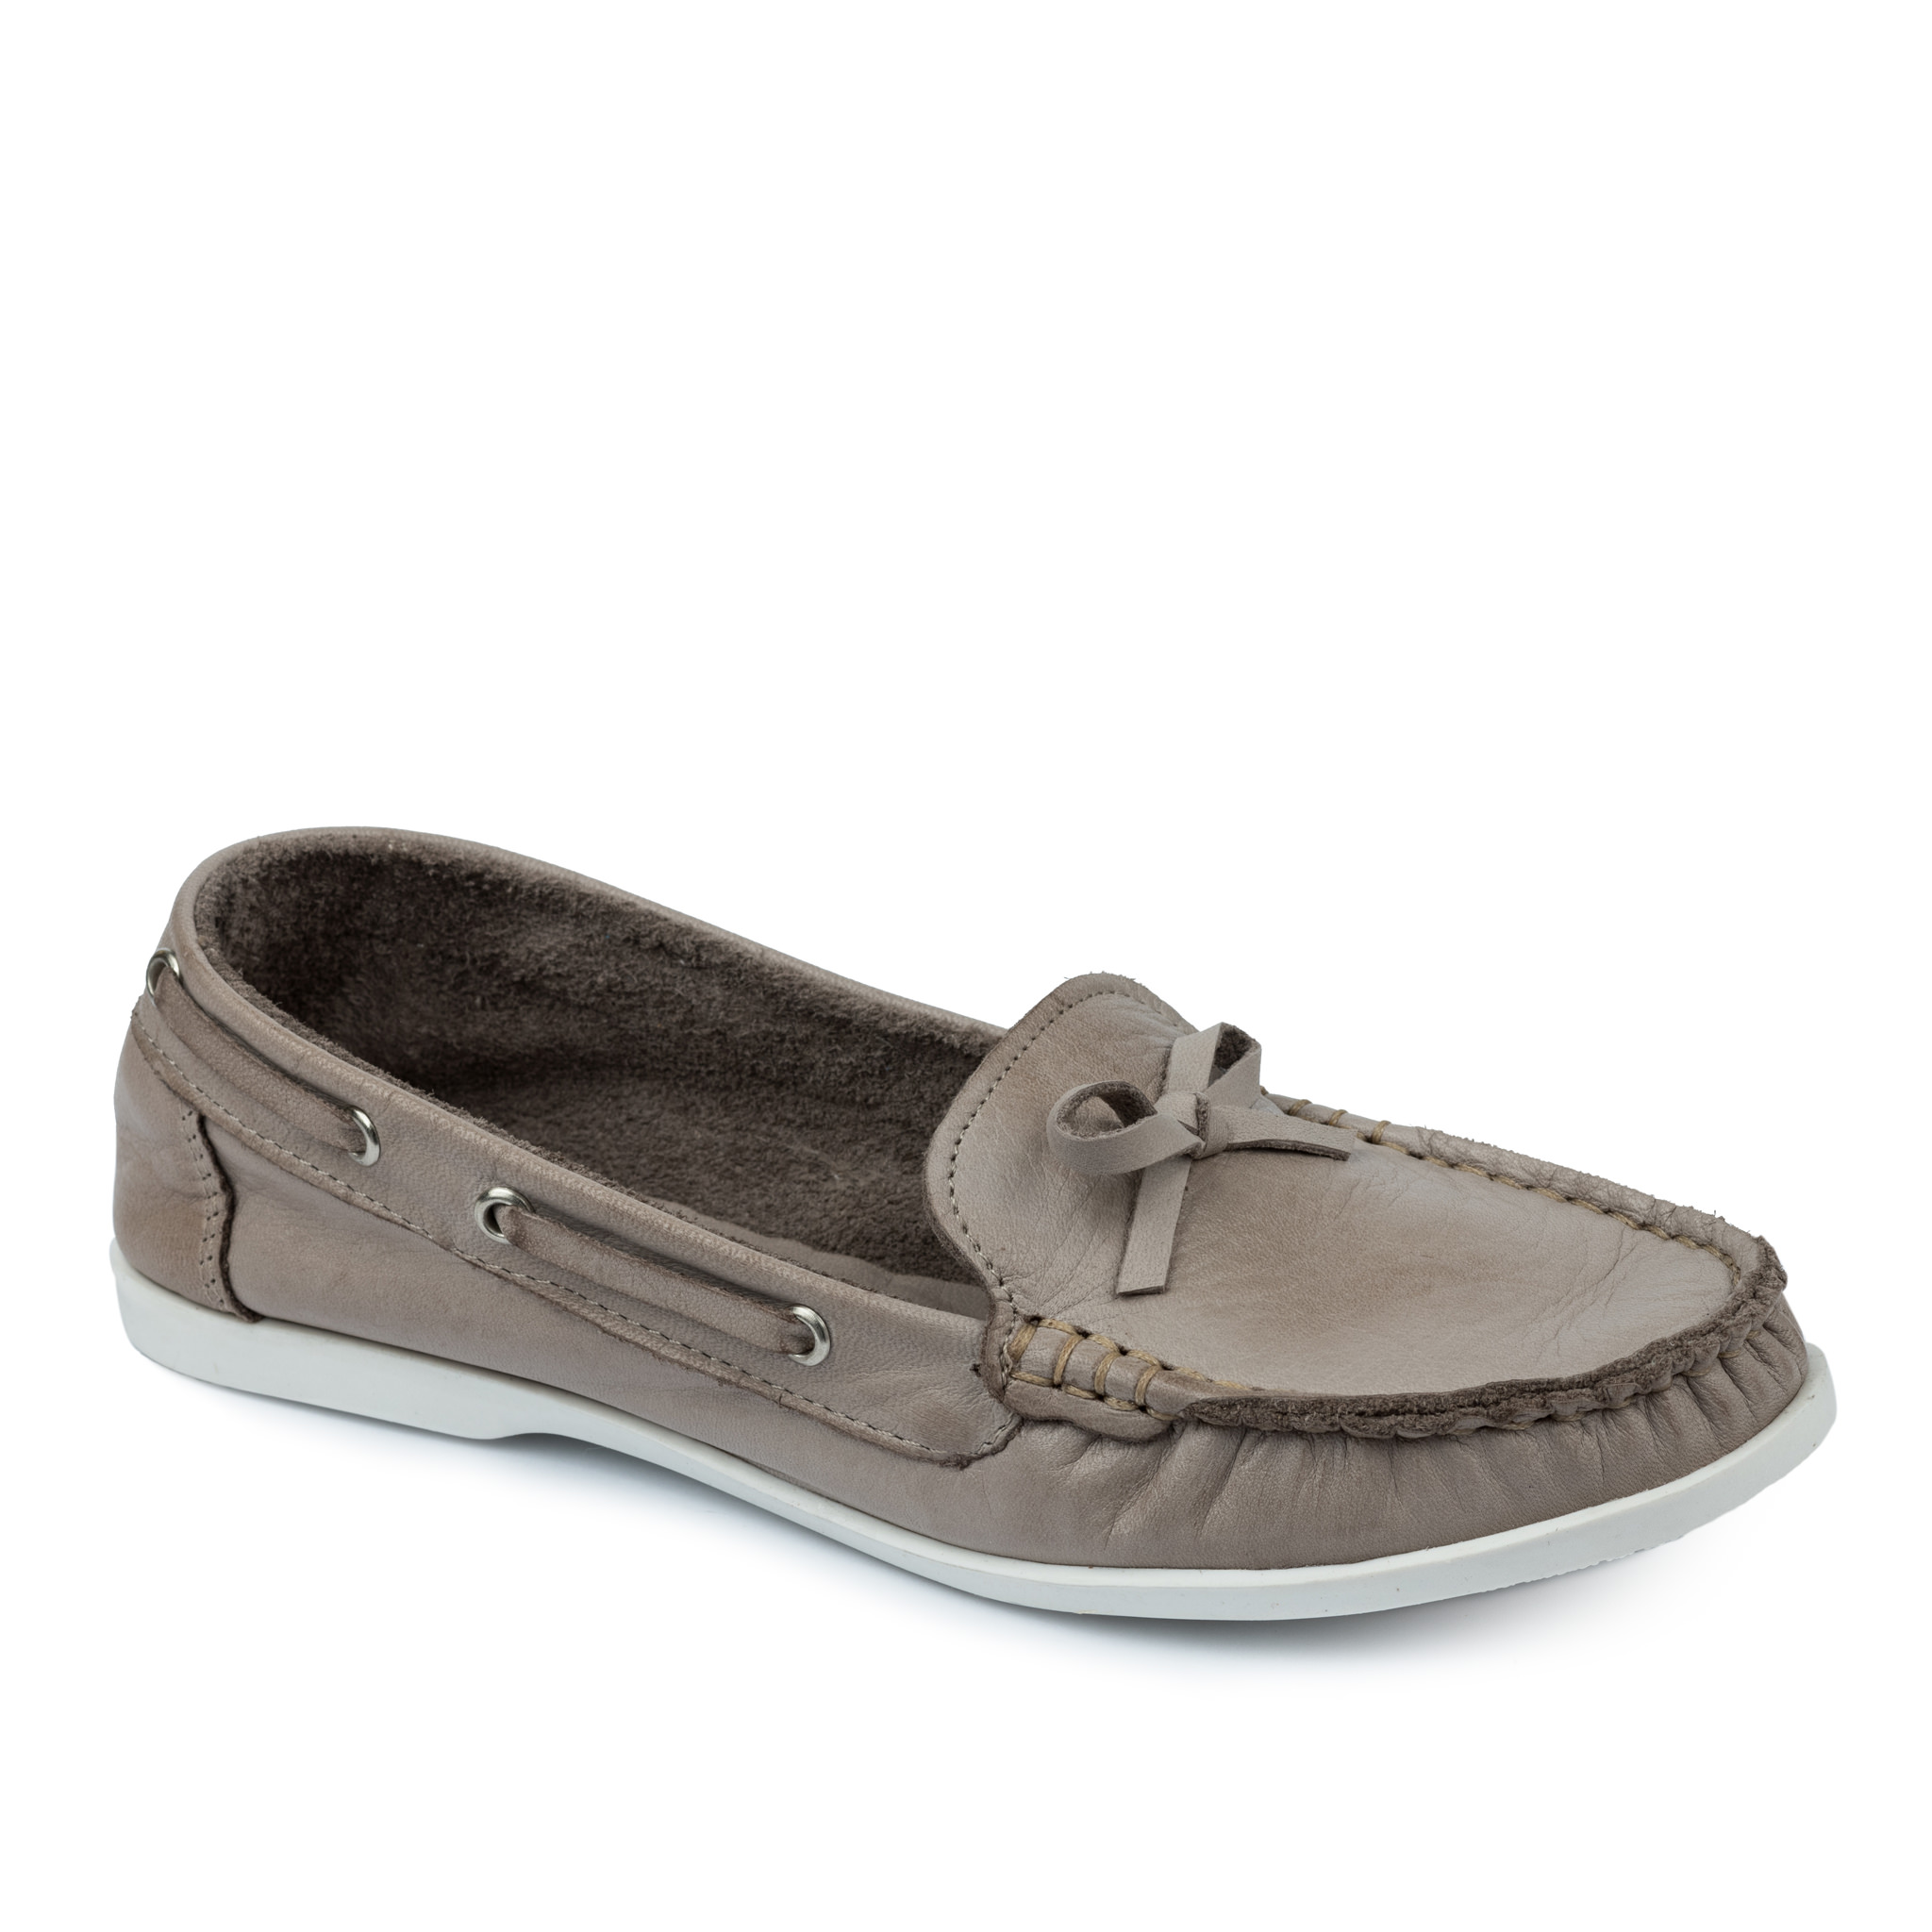 Leather moccasins A598 - BEIGE